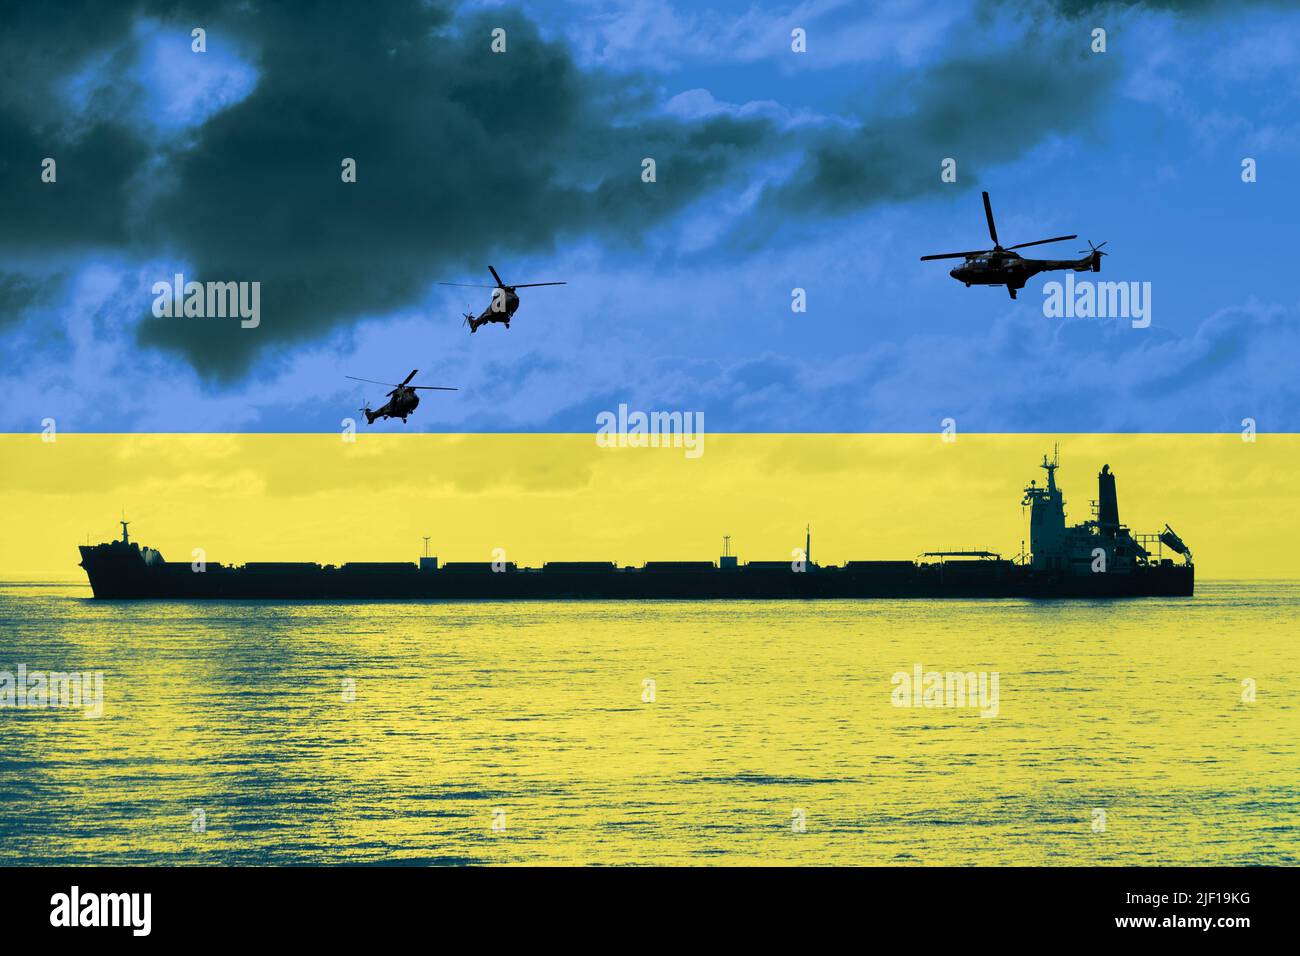 Bulk cargo ship and military helicopters overlayed with flag of Ukraine. Russia/Ukraine conflict war, wheat, grain, shortage, world food prices... Stock Photo